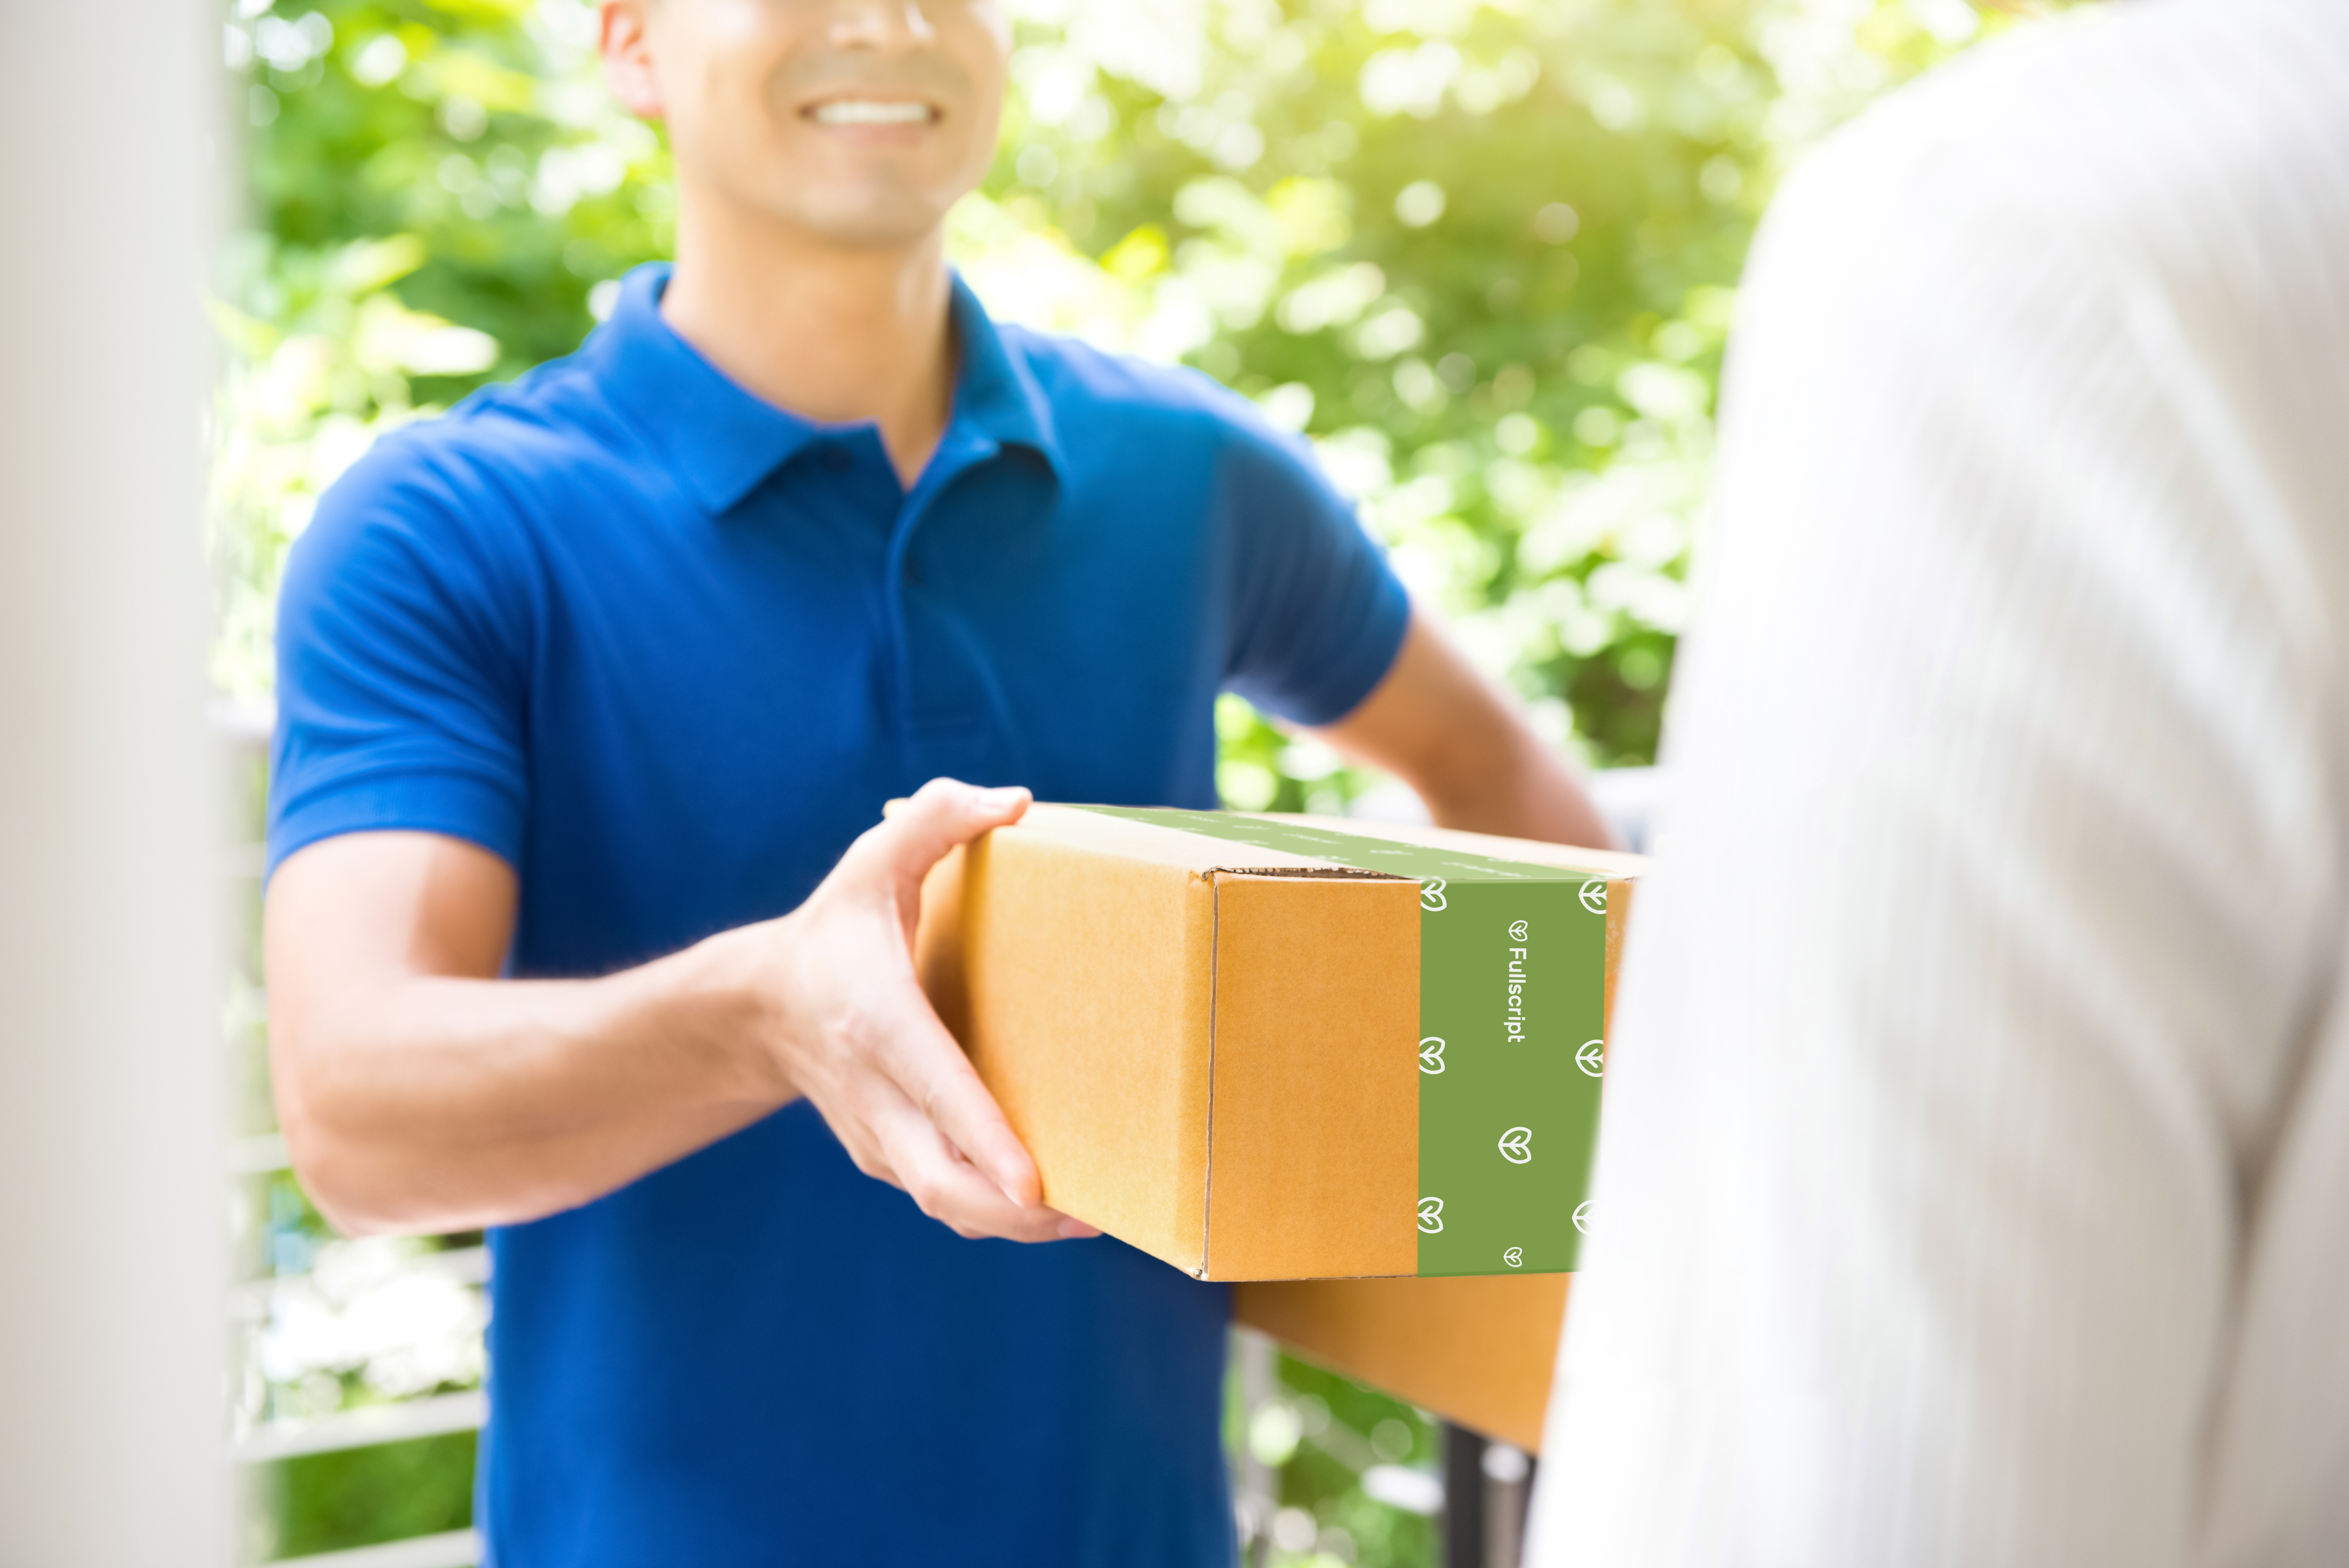 Delivery person handing a Fullscript package to a person